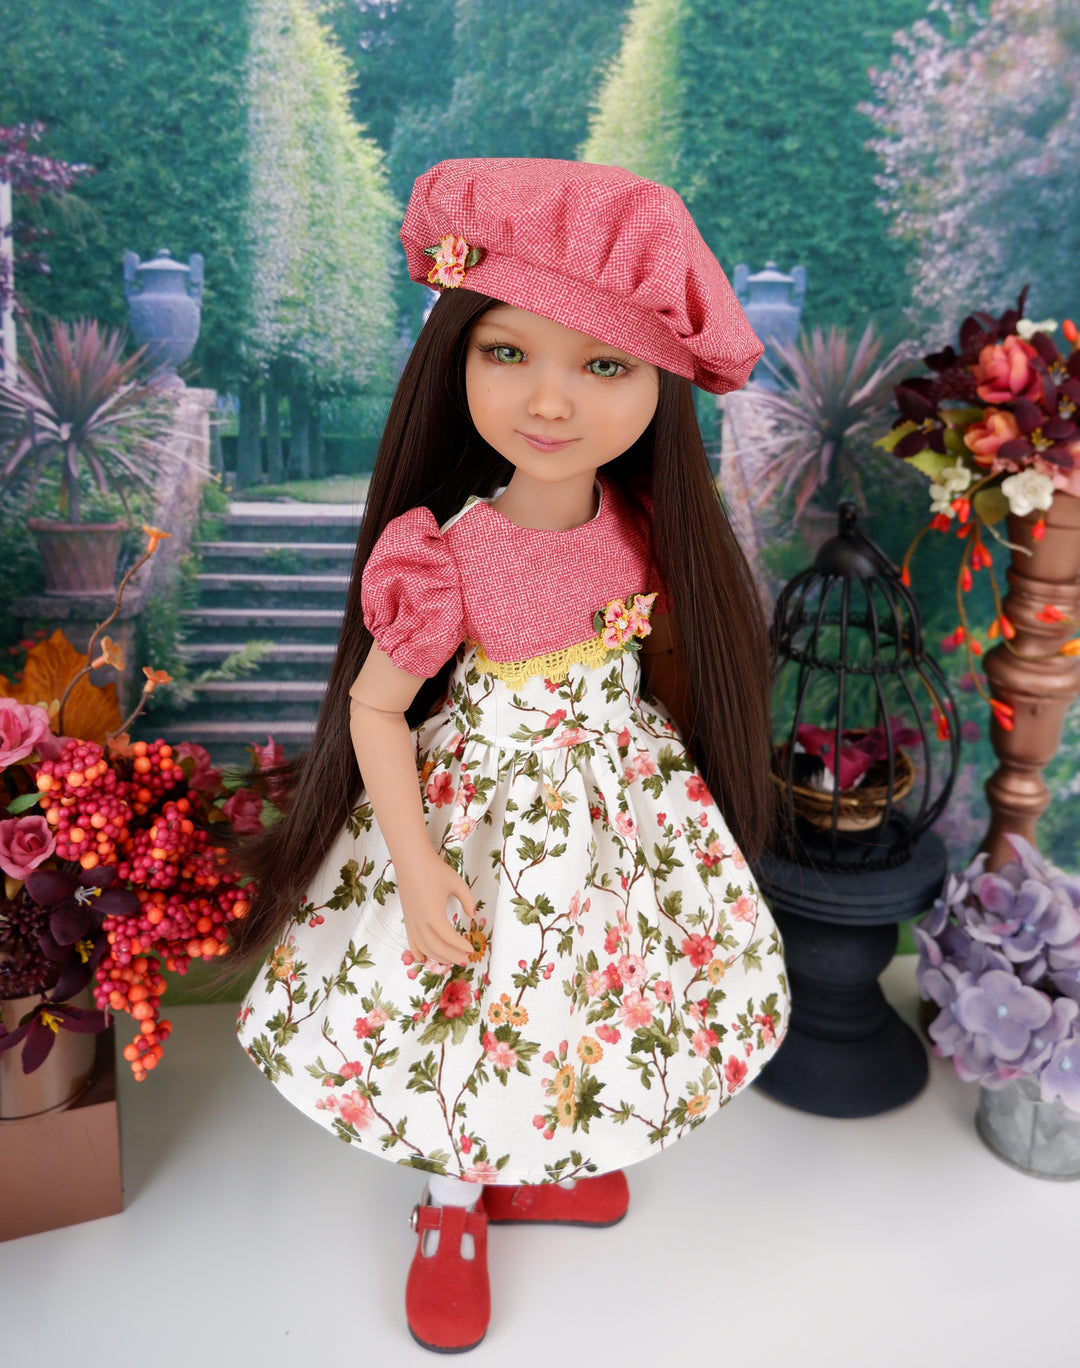 Autumn Brambles - dress ensemble with shoes for Ruby Red Fashion Friends doll